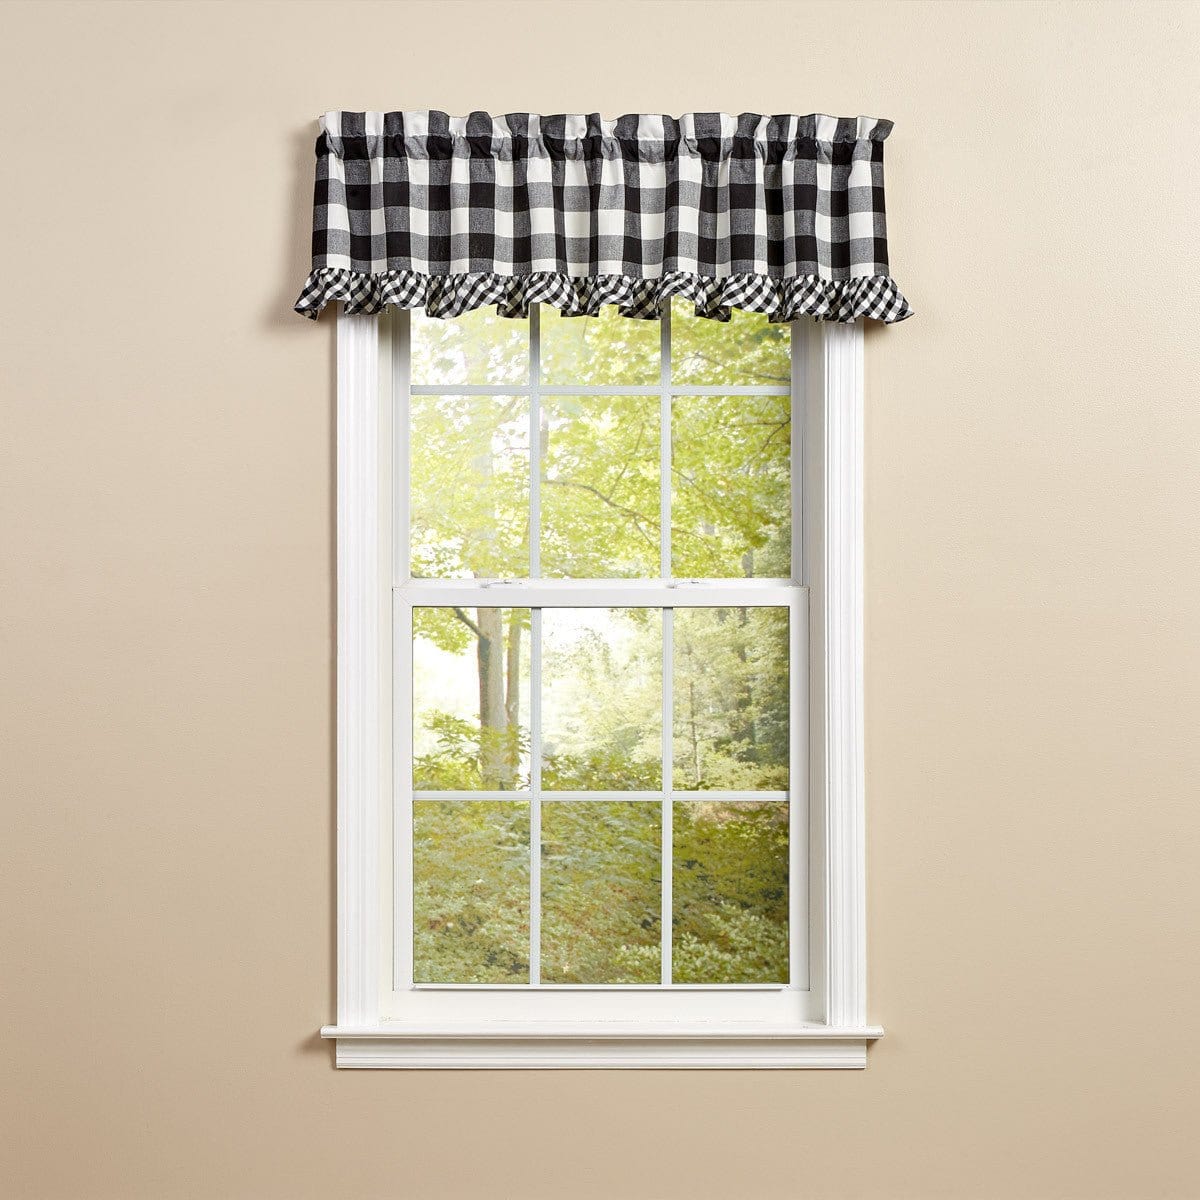 Wicklow Check in Black &amp; Cream Ruffled Valance Unlined-Park Designs-The Village Merchant